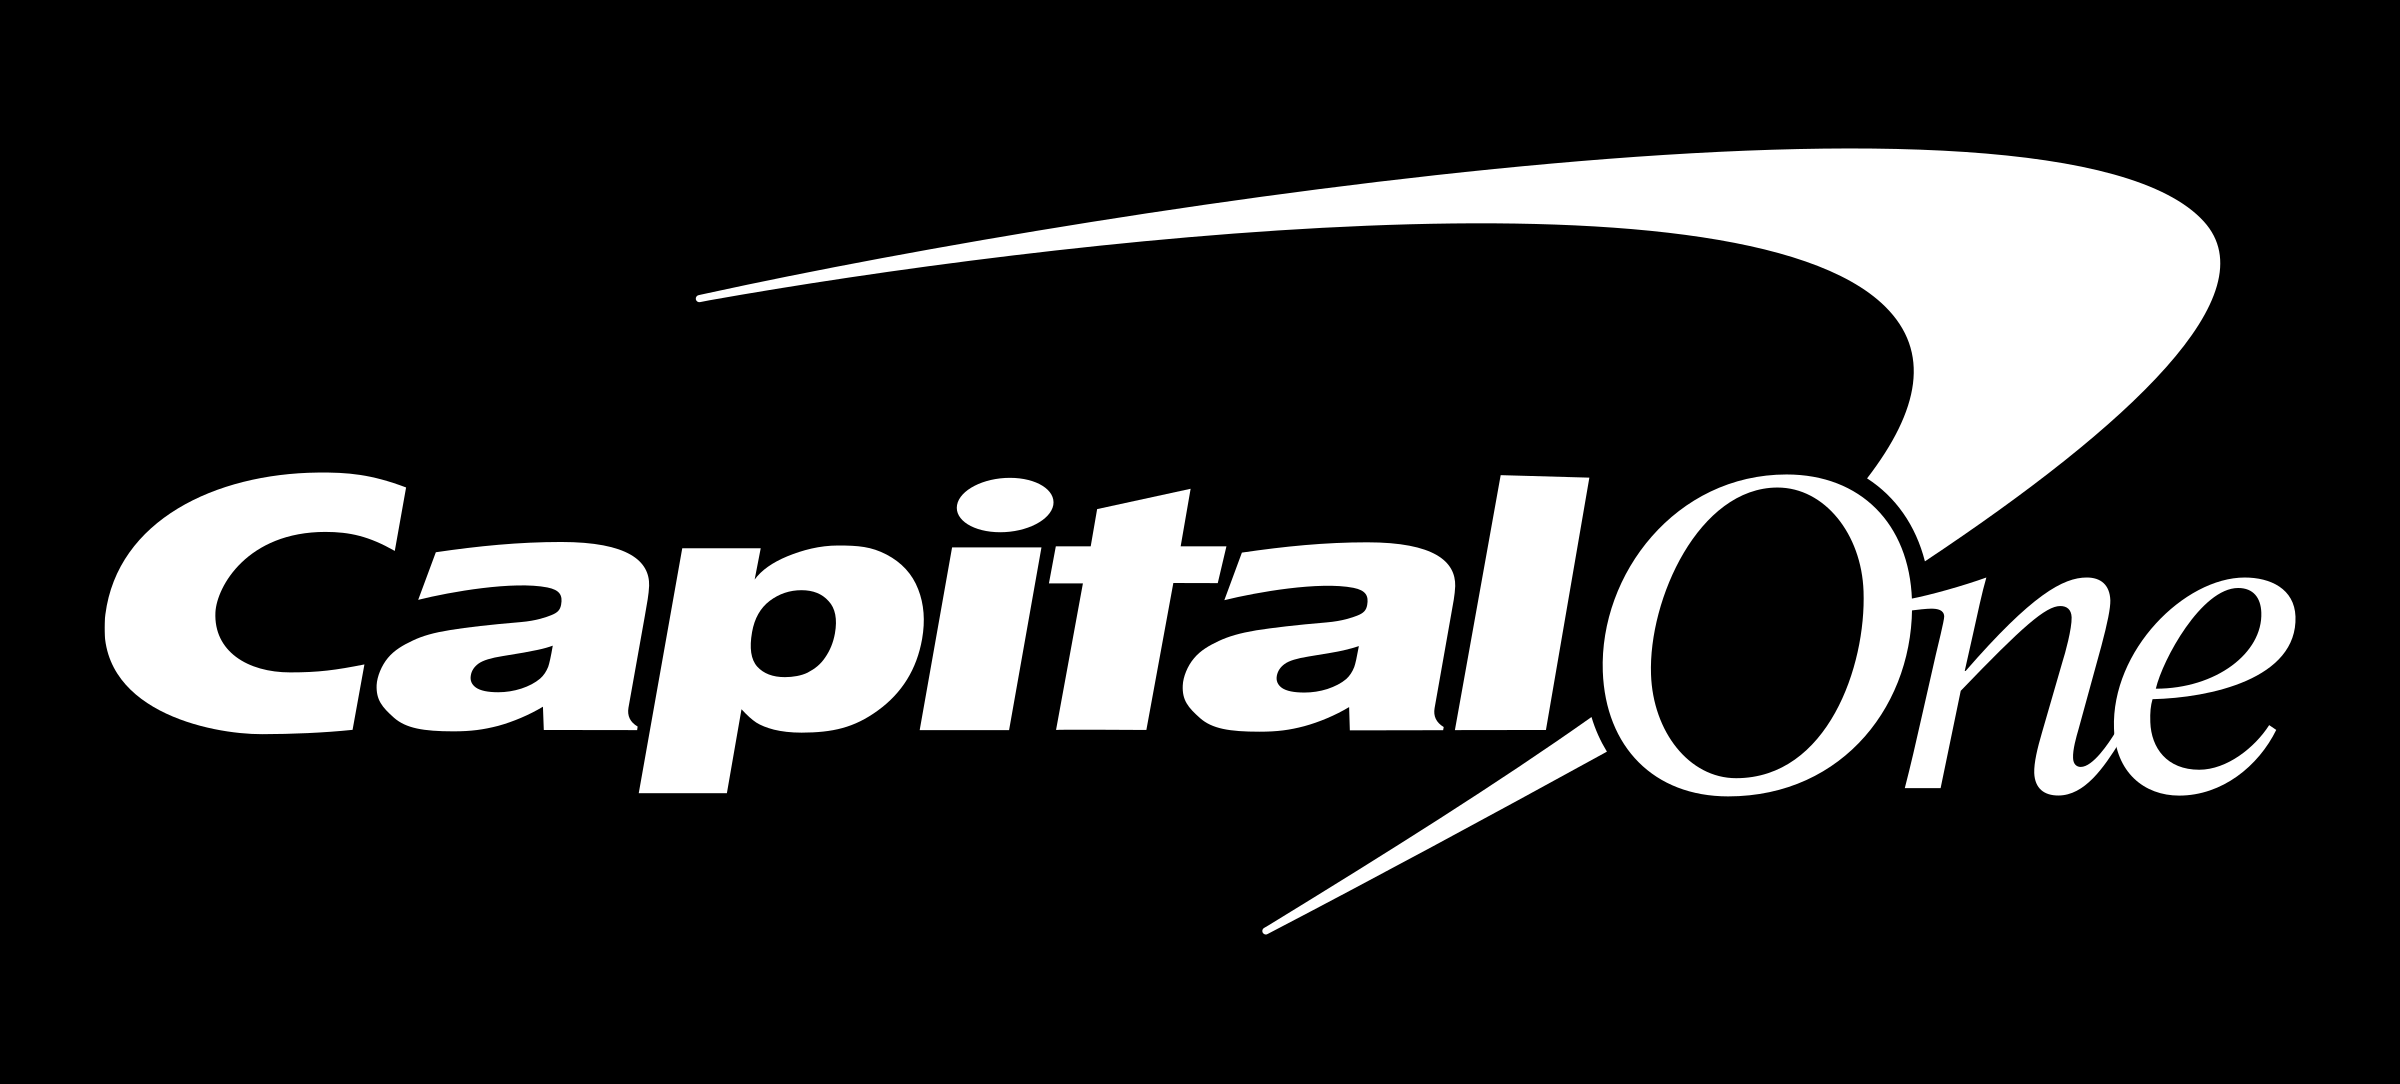 Capital One Logo White - Capital One Vector, Transparent background PNG HD thumbnail